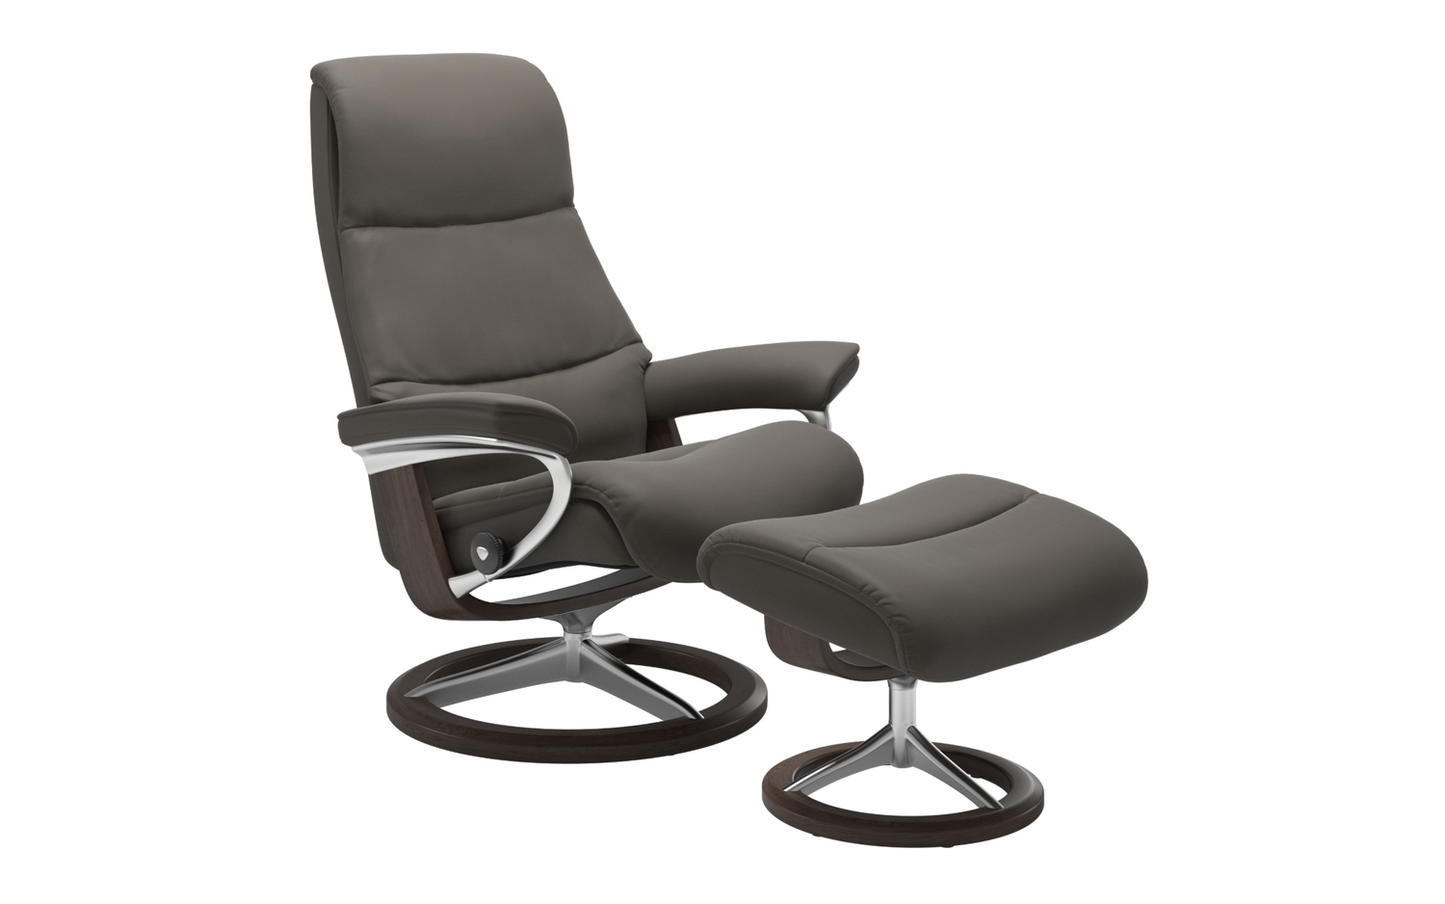 Stressless View SL – Recliners